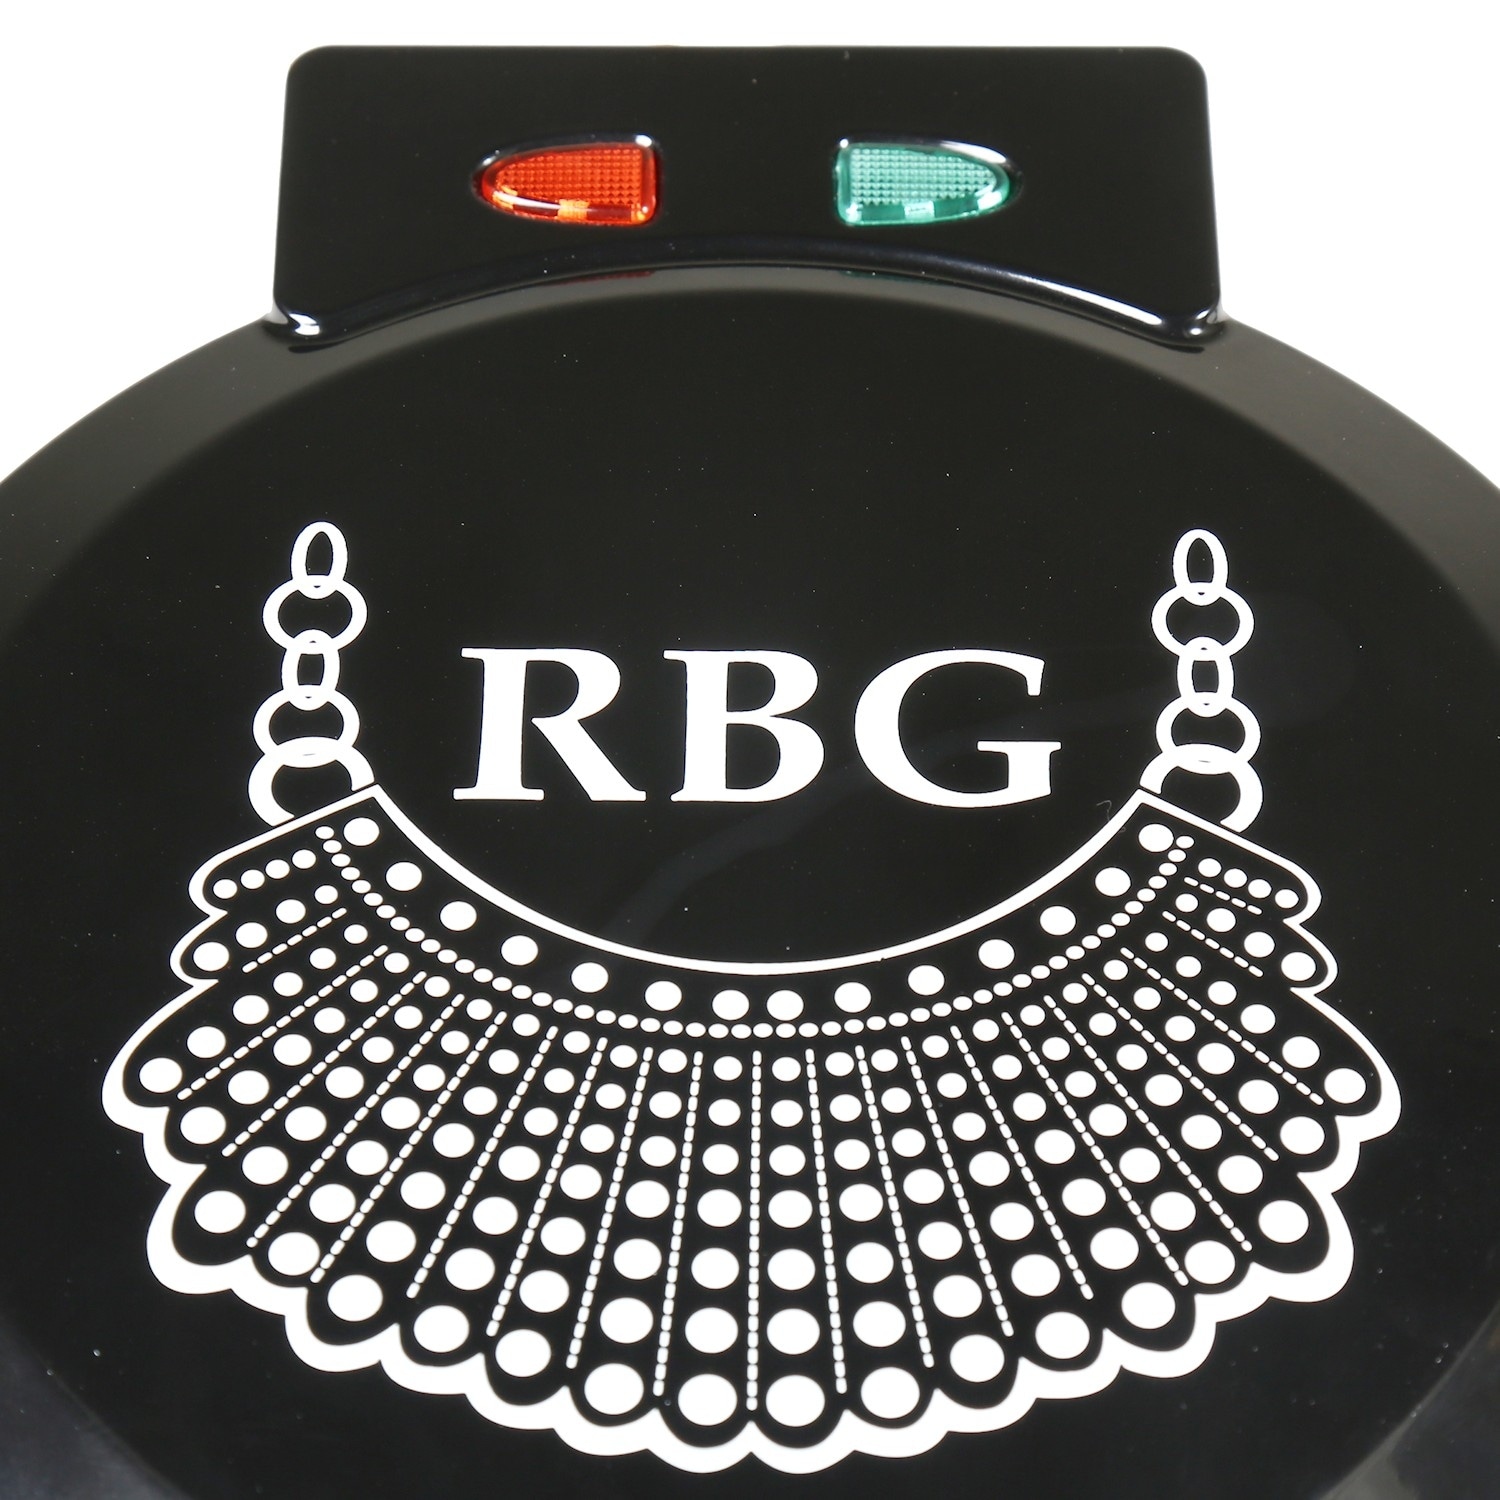 https://ak1.ostkcdn.com/images/products/is/images/direct/35277a5b55d0ed37b837a822fc9f60749a779878/Ruth-Bader-Ginsburg-Waffle-Maker%2C-RBG%27s-Face-on-a-Waffle-Pancake%2C-Waffle-Iron.jpg